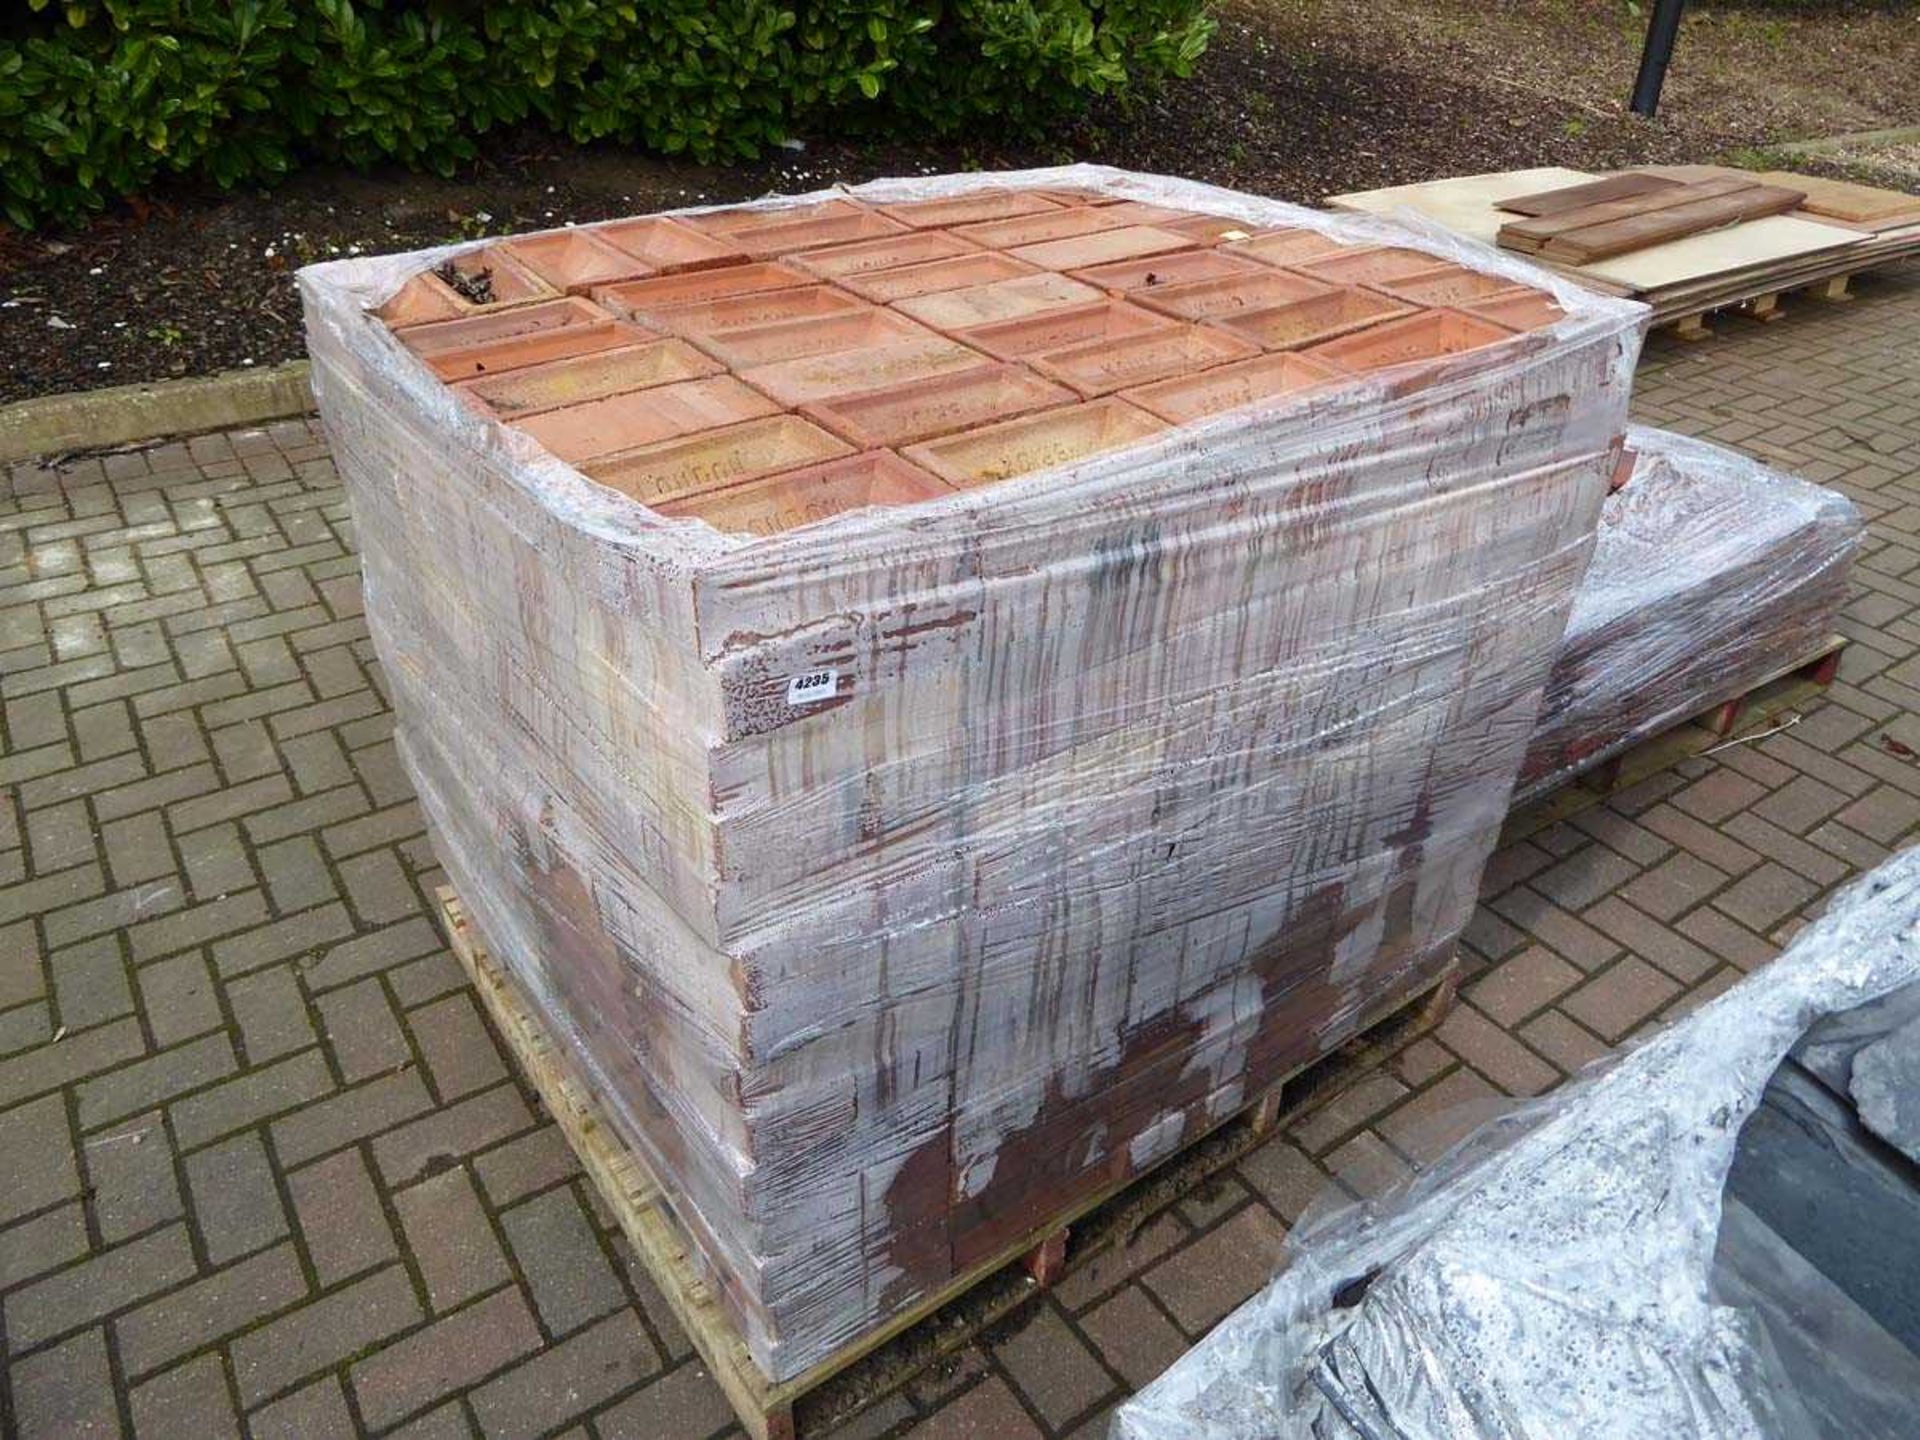 Large pallet of red brick